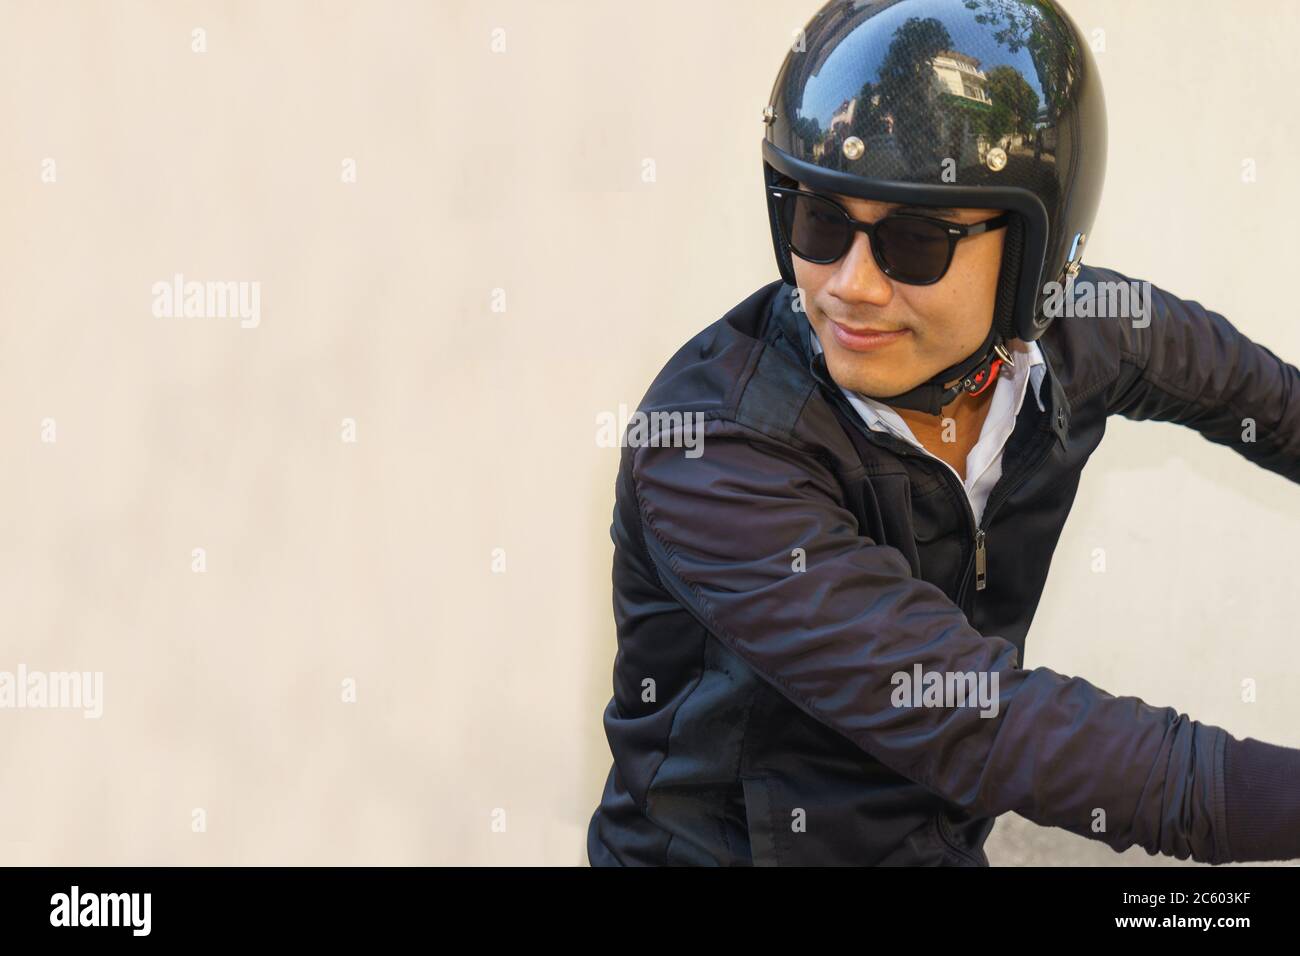 Asian Male Motorcycle Stock Photos and Images - 123RF